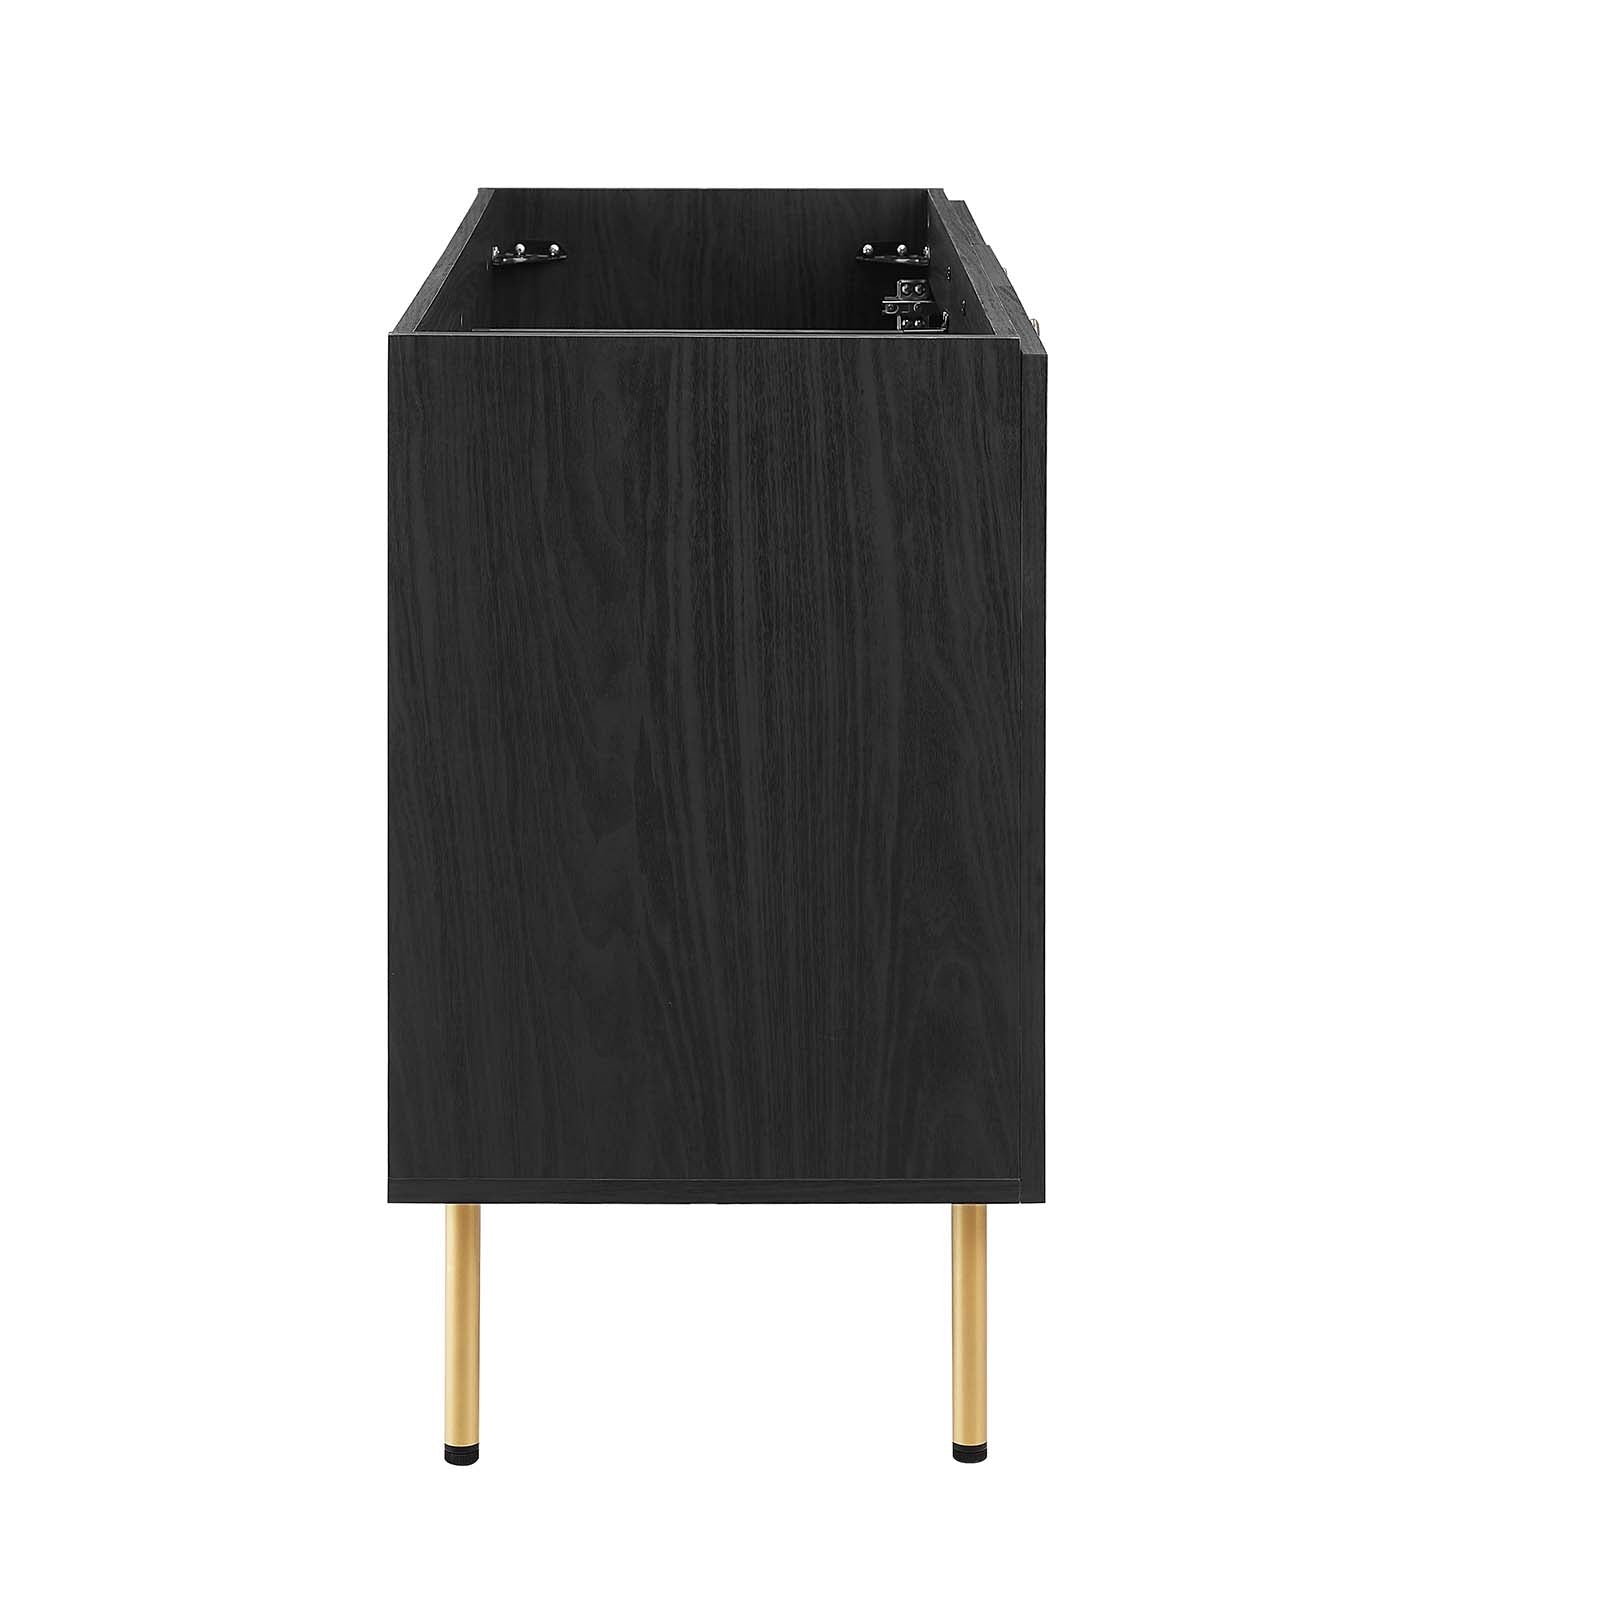 Chaucer 48" Bathroom Vanity Cabinet (Sink Basin Not Included) - East Shore Modern Home Furnishings